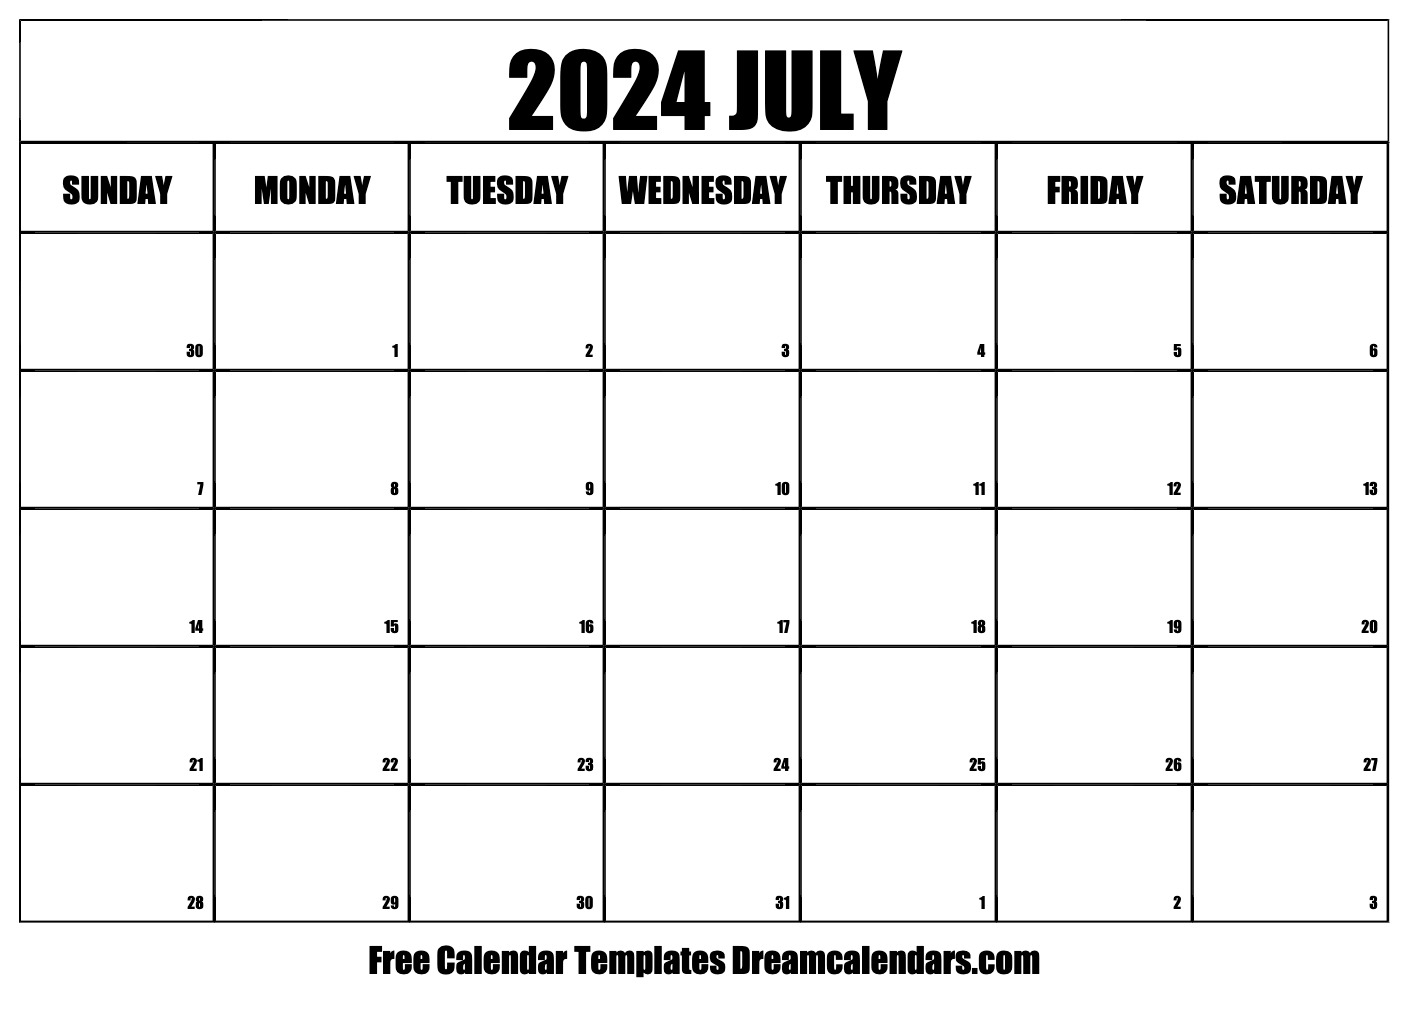 July 2024 Calendar | Free Blank Printable With Holidays for July Free Printable Calendar 2024